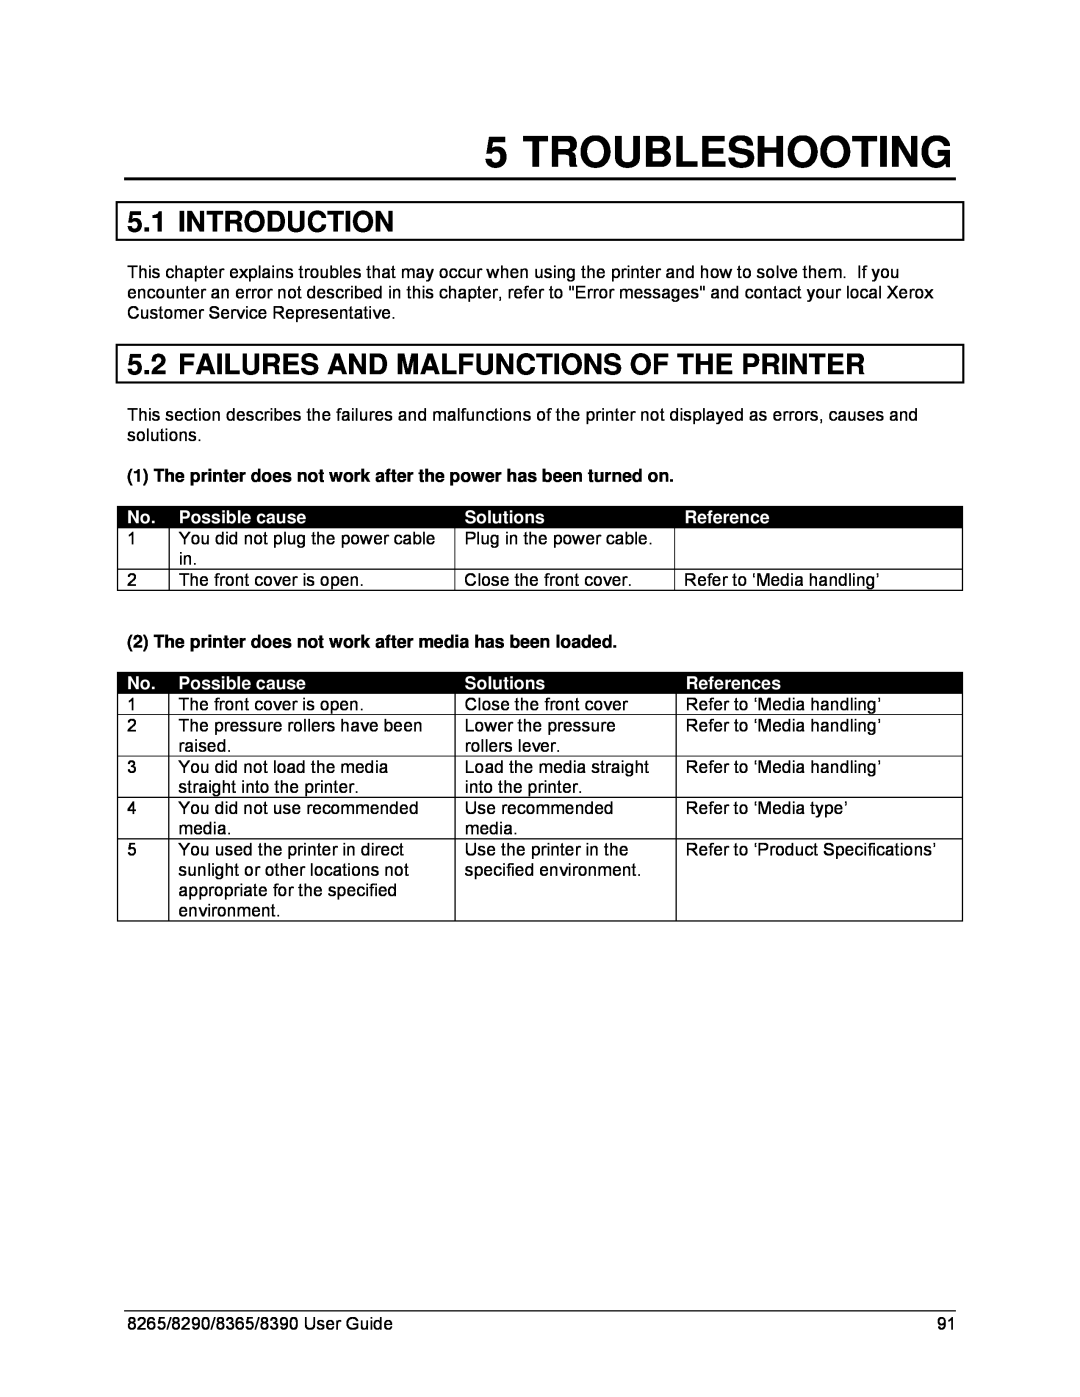 Xerox 8365 Troubleshooting, Introduction, Failures And Malfunctions Of The Printer, Possible cause, Solutions, Reference 